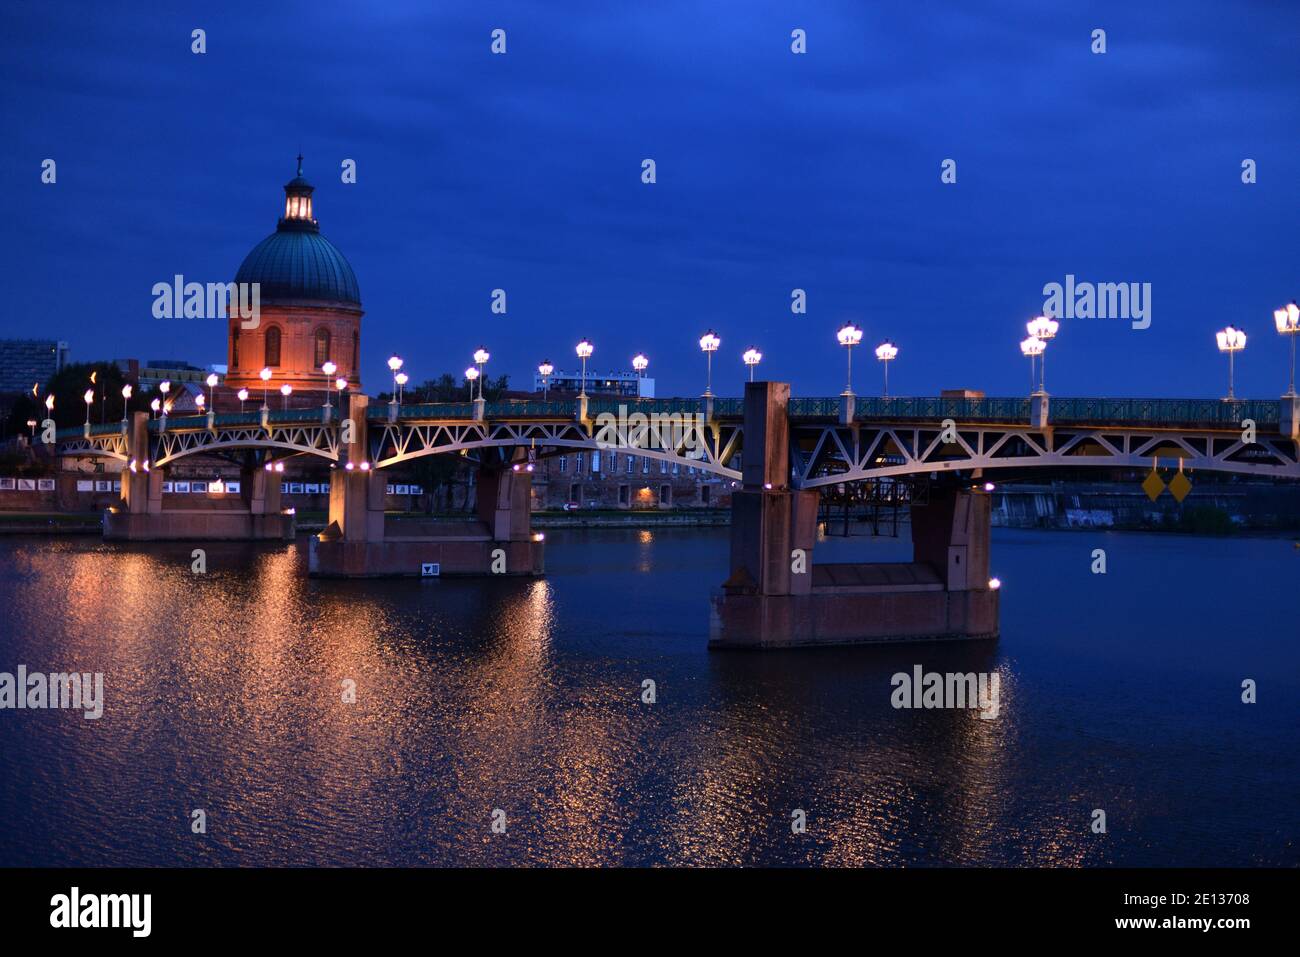 Townscape or Skyline of Toulouse at Night or Dusk with Baroque Dome of Saint Joseph Chapel Grave & St Pierre Bridge over Garonne River Toulouse France Stock Photo